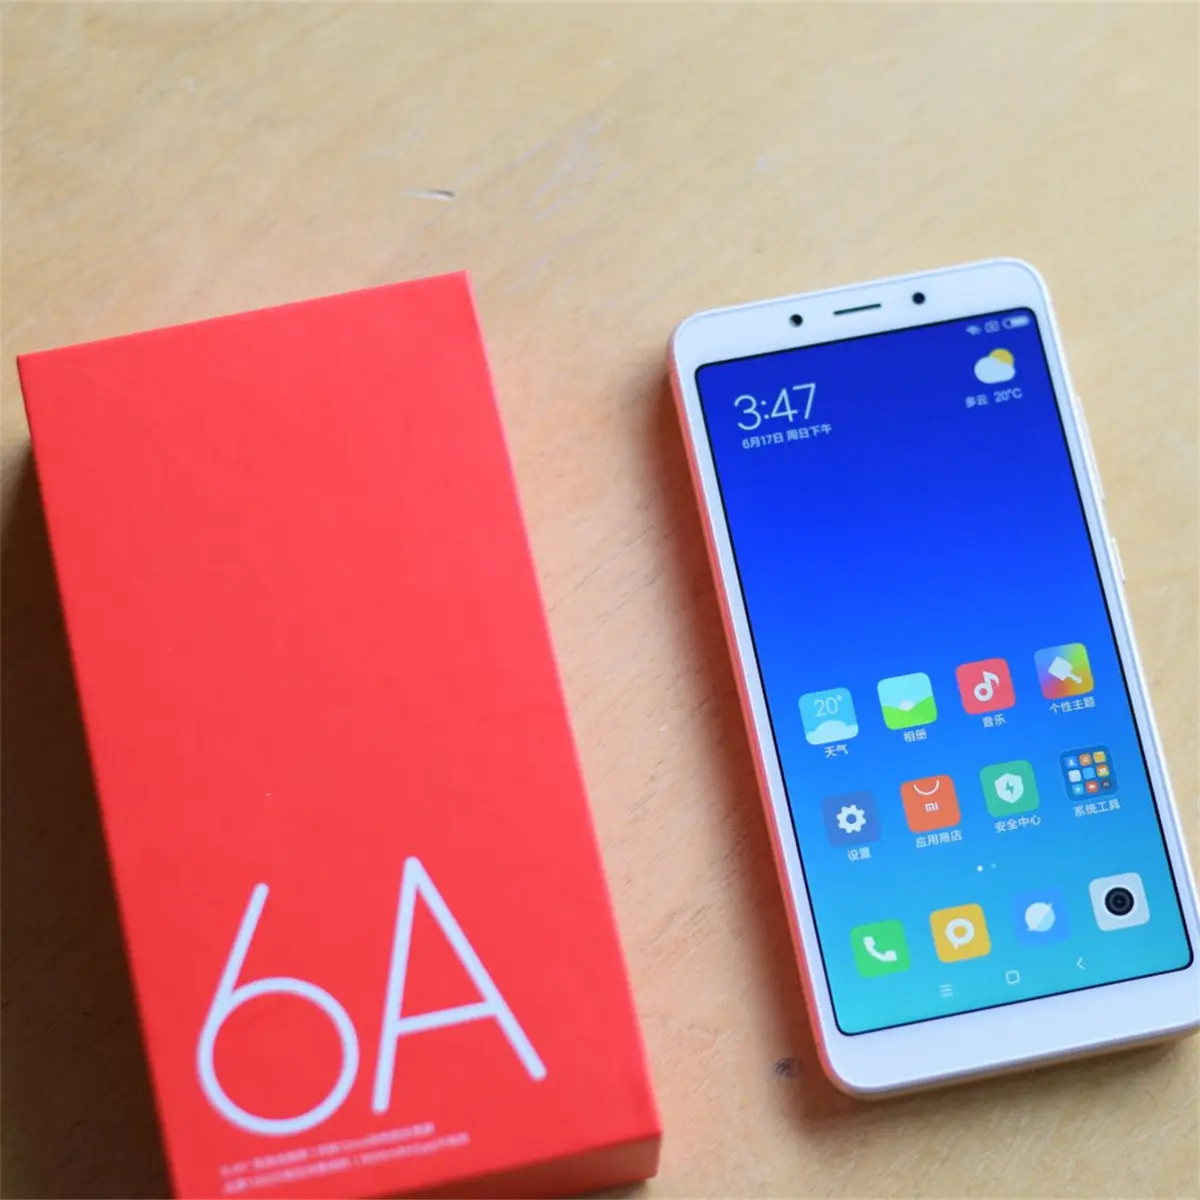 100% Original Ram 3+32G Cheap Price Android Dual SIM Second Hand For Xiaomi Redmi 6A Used Mobile Phones